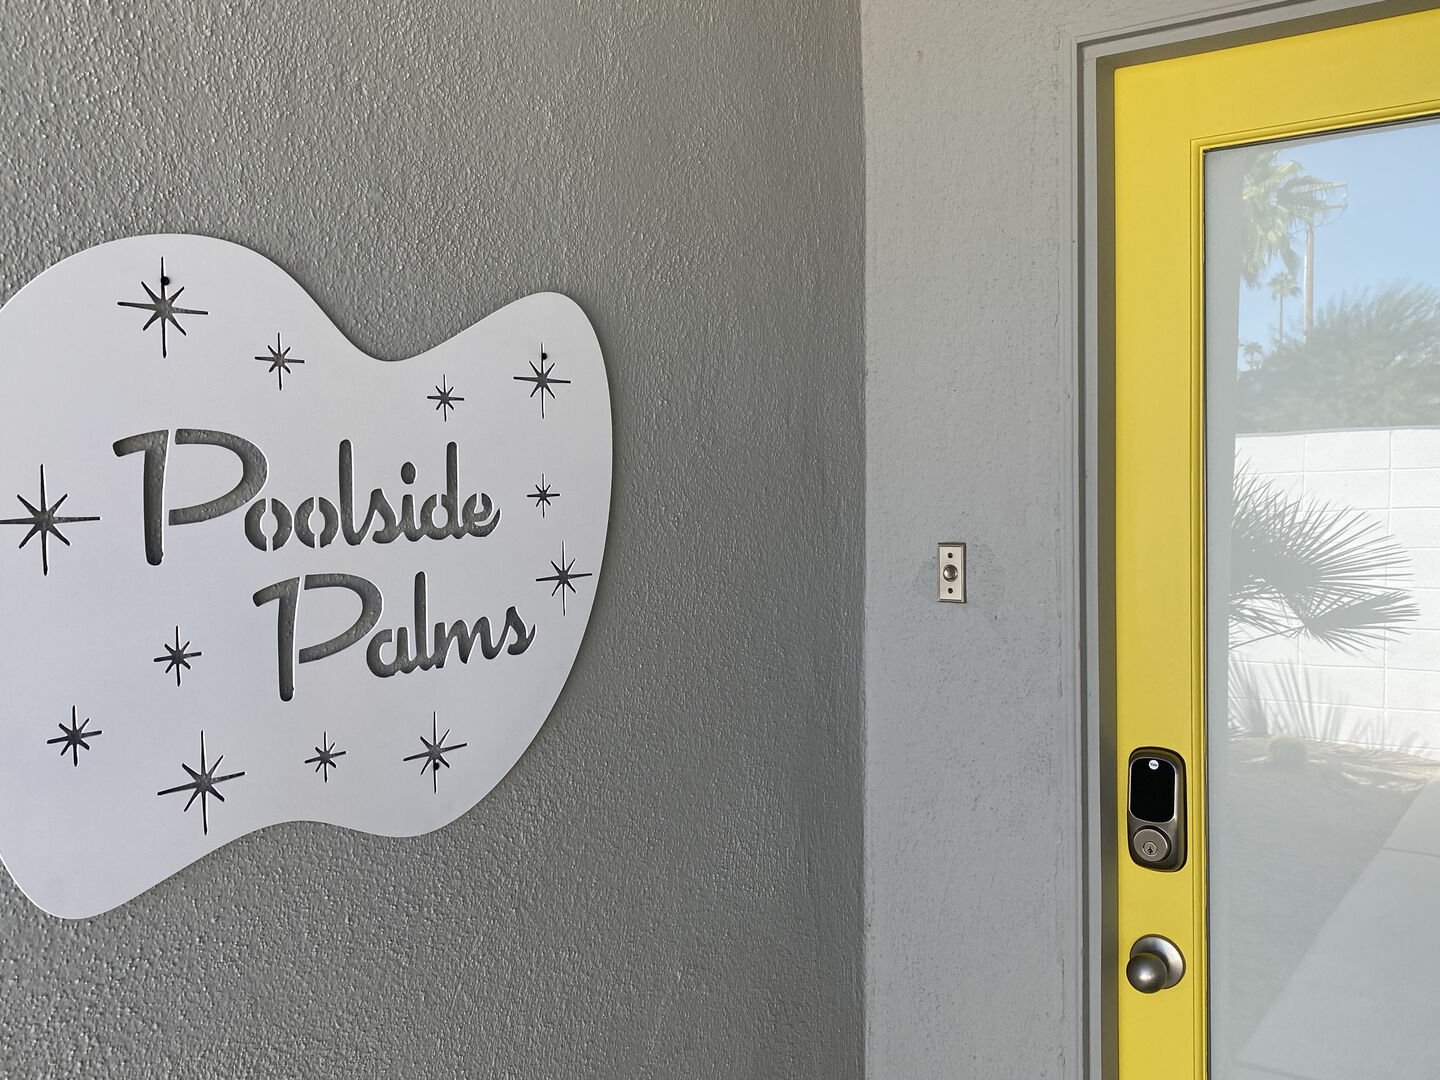 WELCOME TO POOLSIDE PALMS, LETS GO INSIDE!